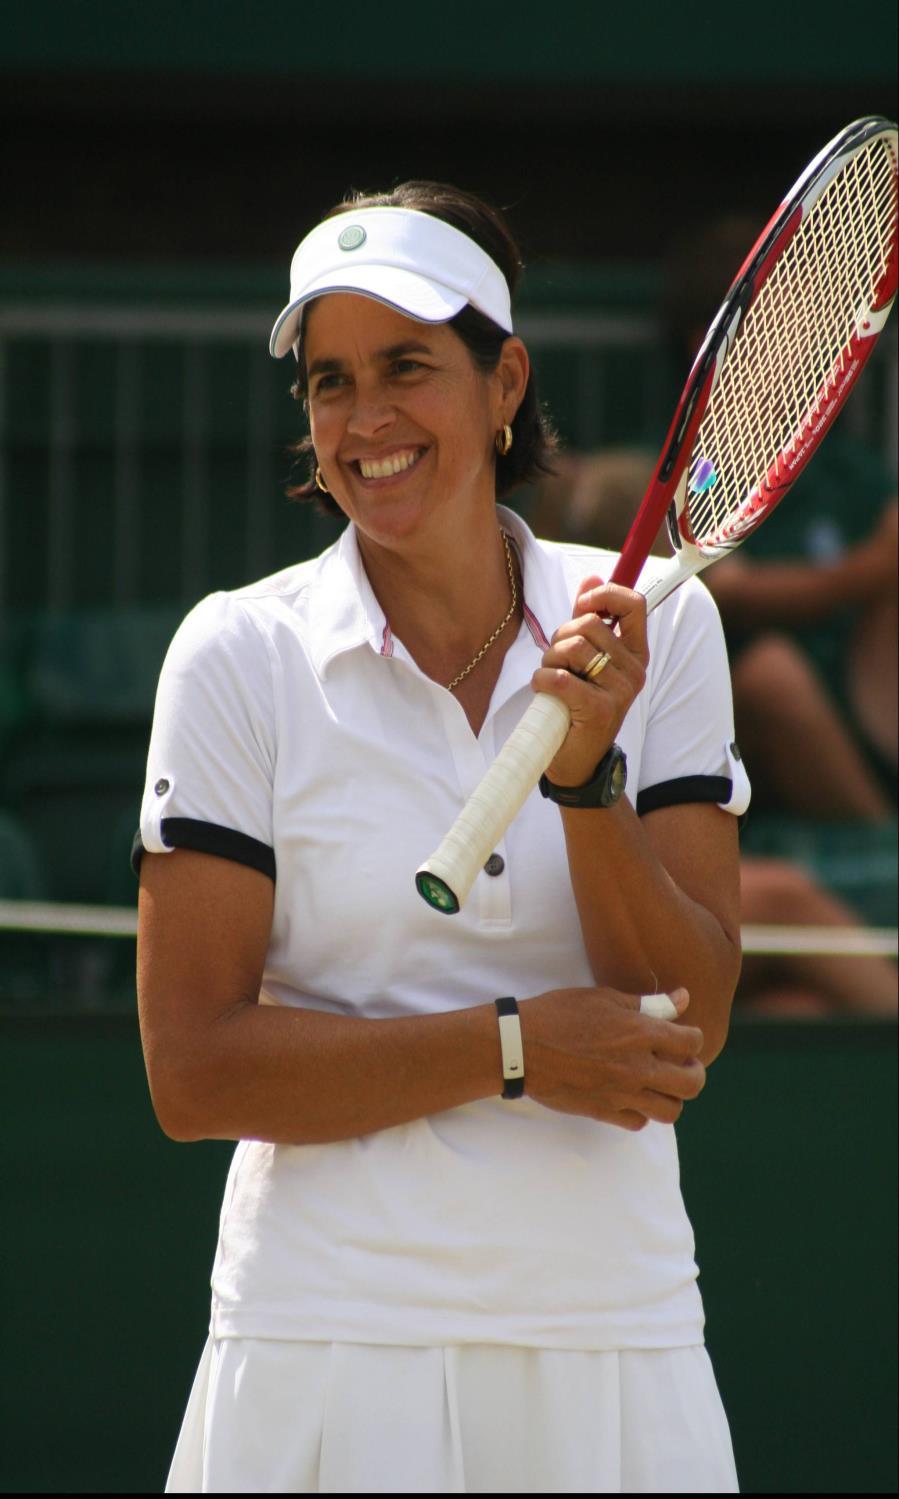 Gigi s illustrious career included winning 2 Olympic Gold Medals and an astounding 71 titles on the WTA tour including 2 singles, 52 doubles and 17 Grand Slam doubles titles.